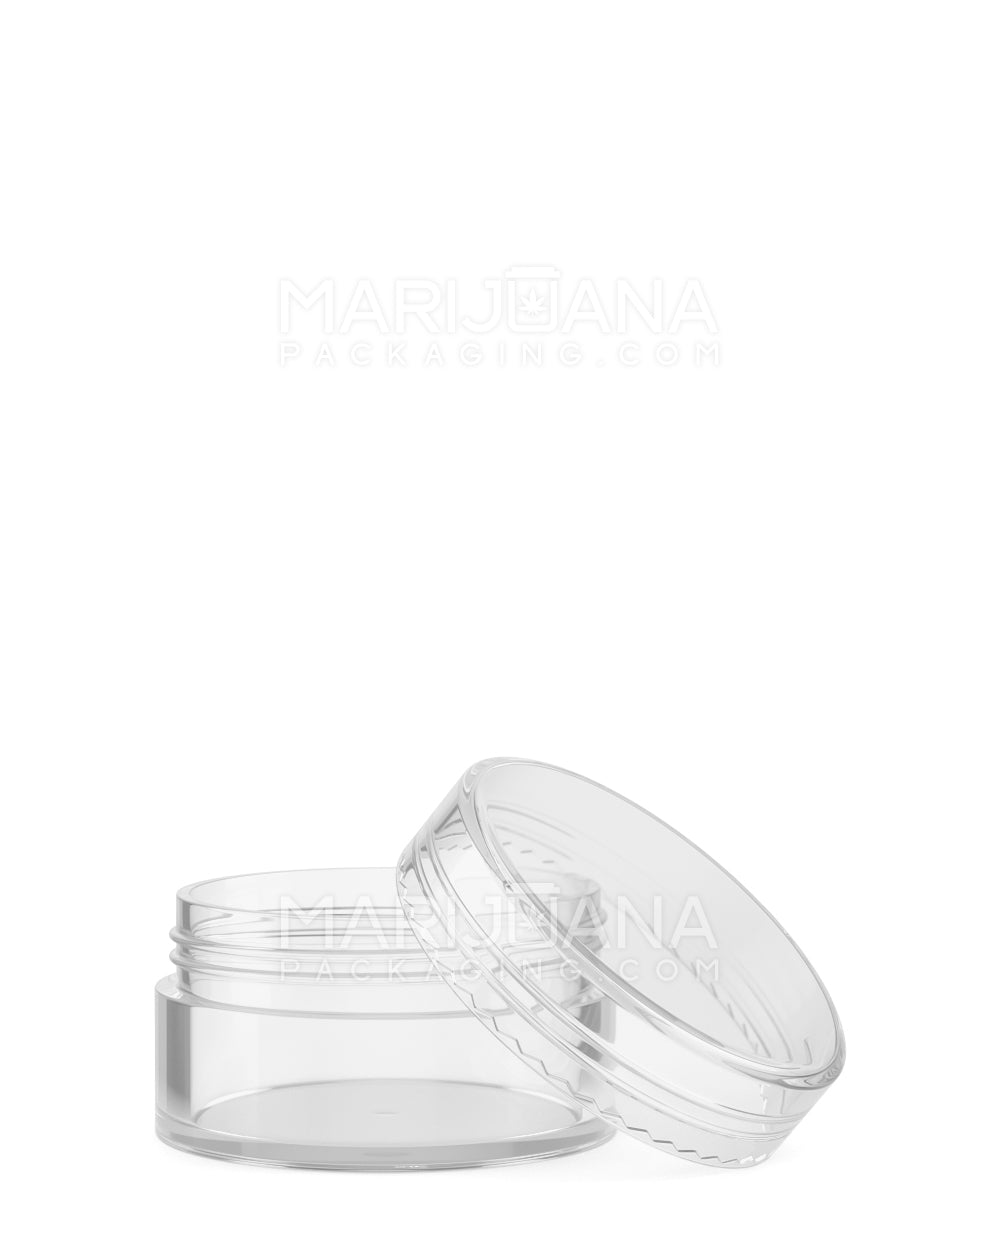 Clear Concentrate Containers w/ Screw Top Cap | 15mL - Plastic - 200 Count - 1